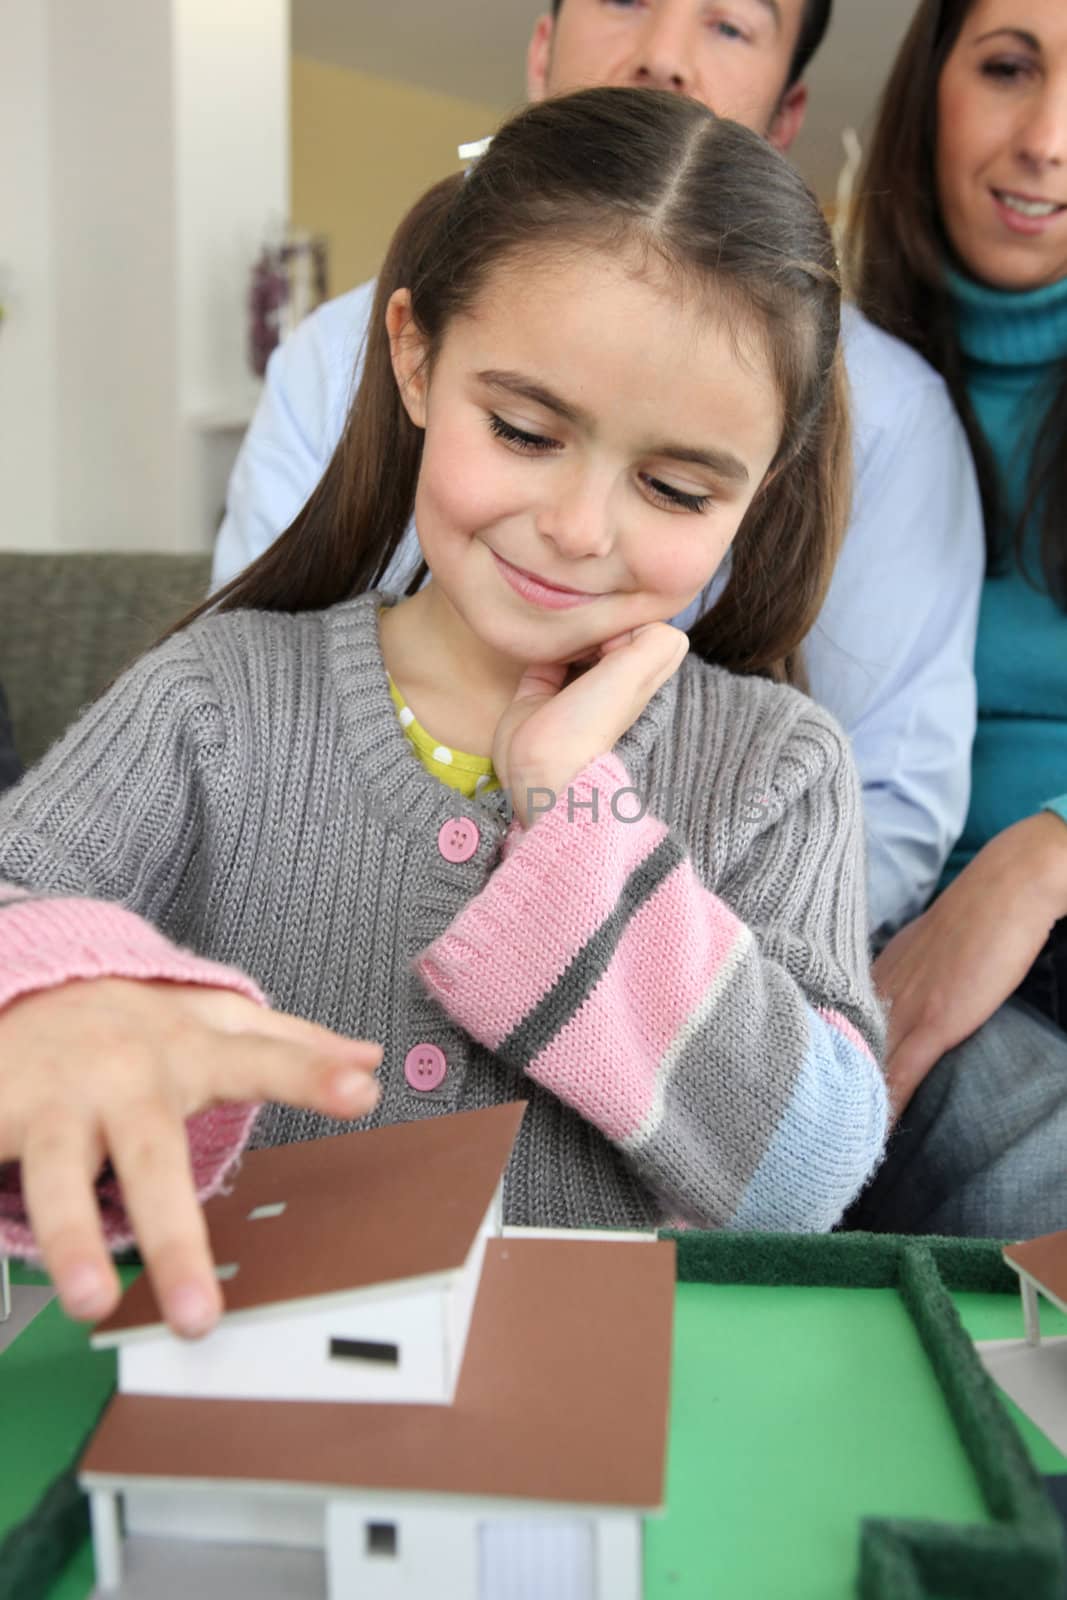 Little girl playing with model house